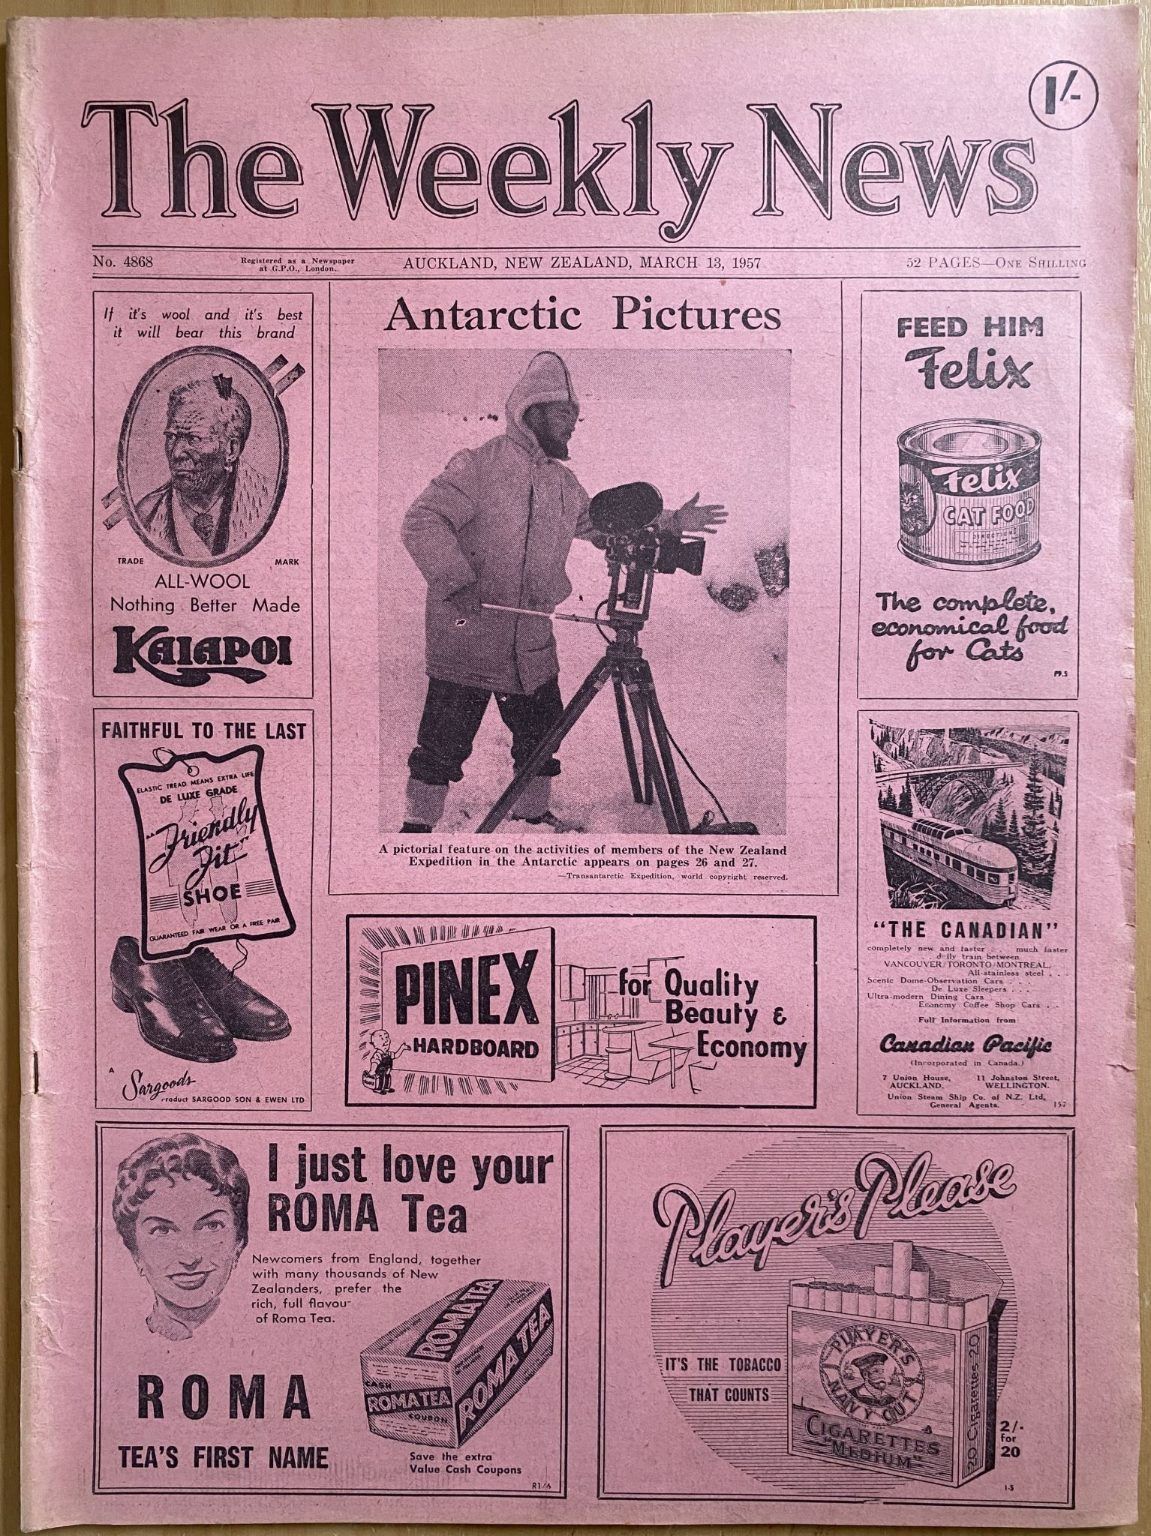 OLD NEWSPAPER: The Weekly News, No. 4868, 13 March 1957